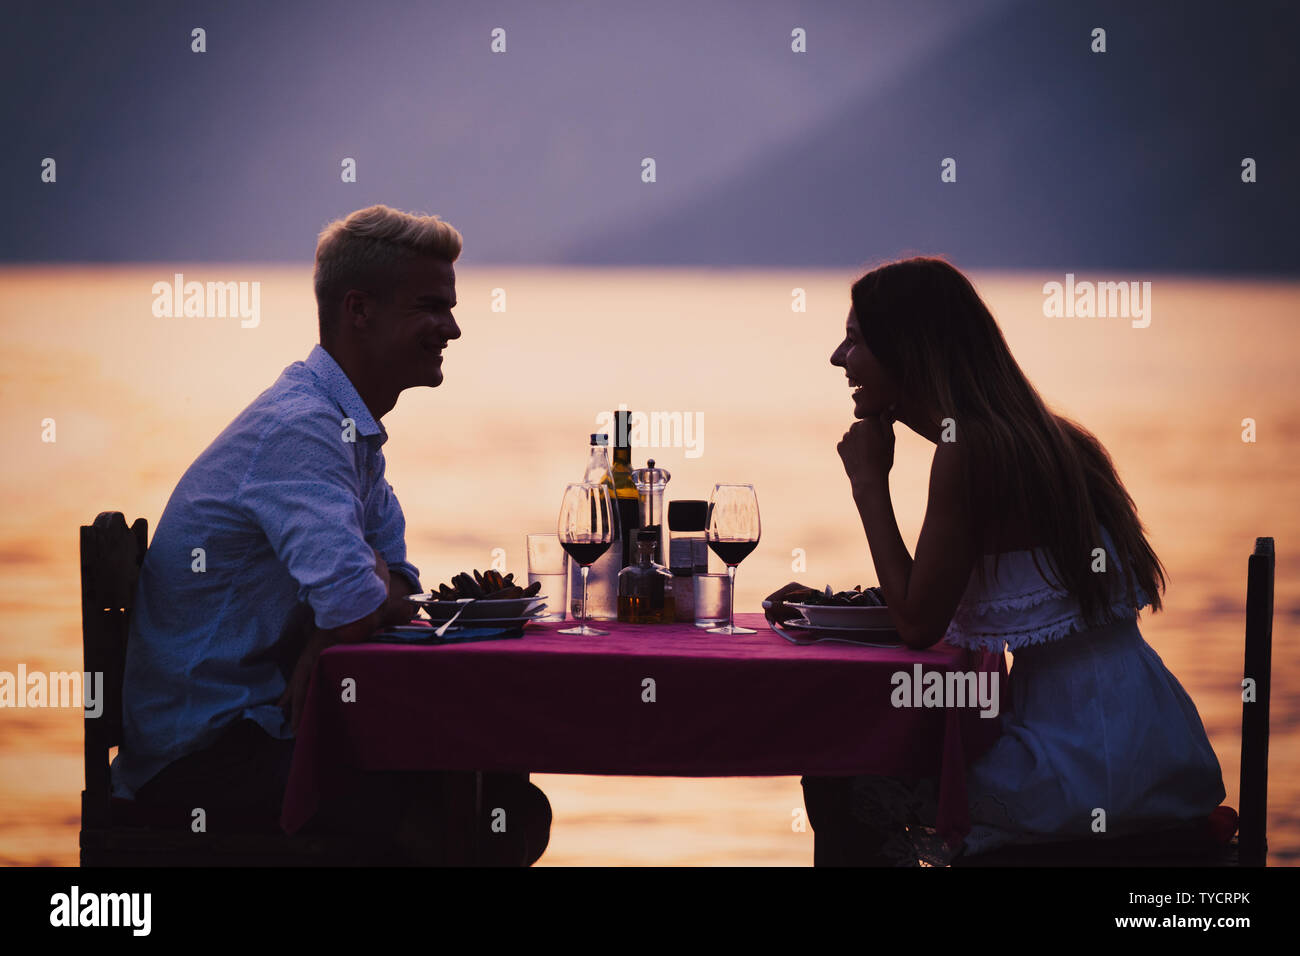 People, vacation, love and romance concept. Young couple enjoying a romantic dinner on beach. Stock Photo